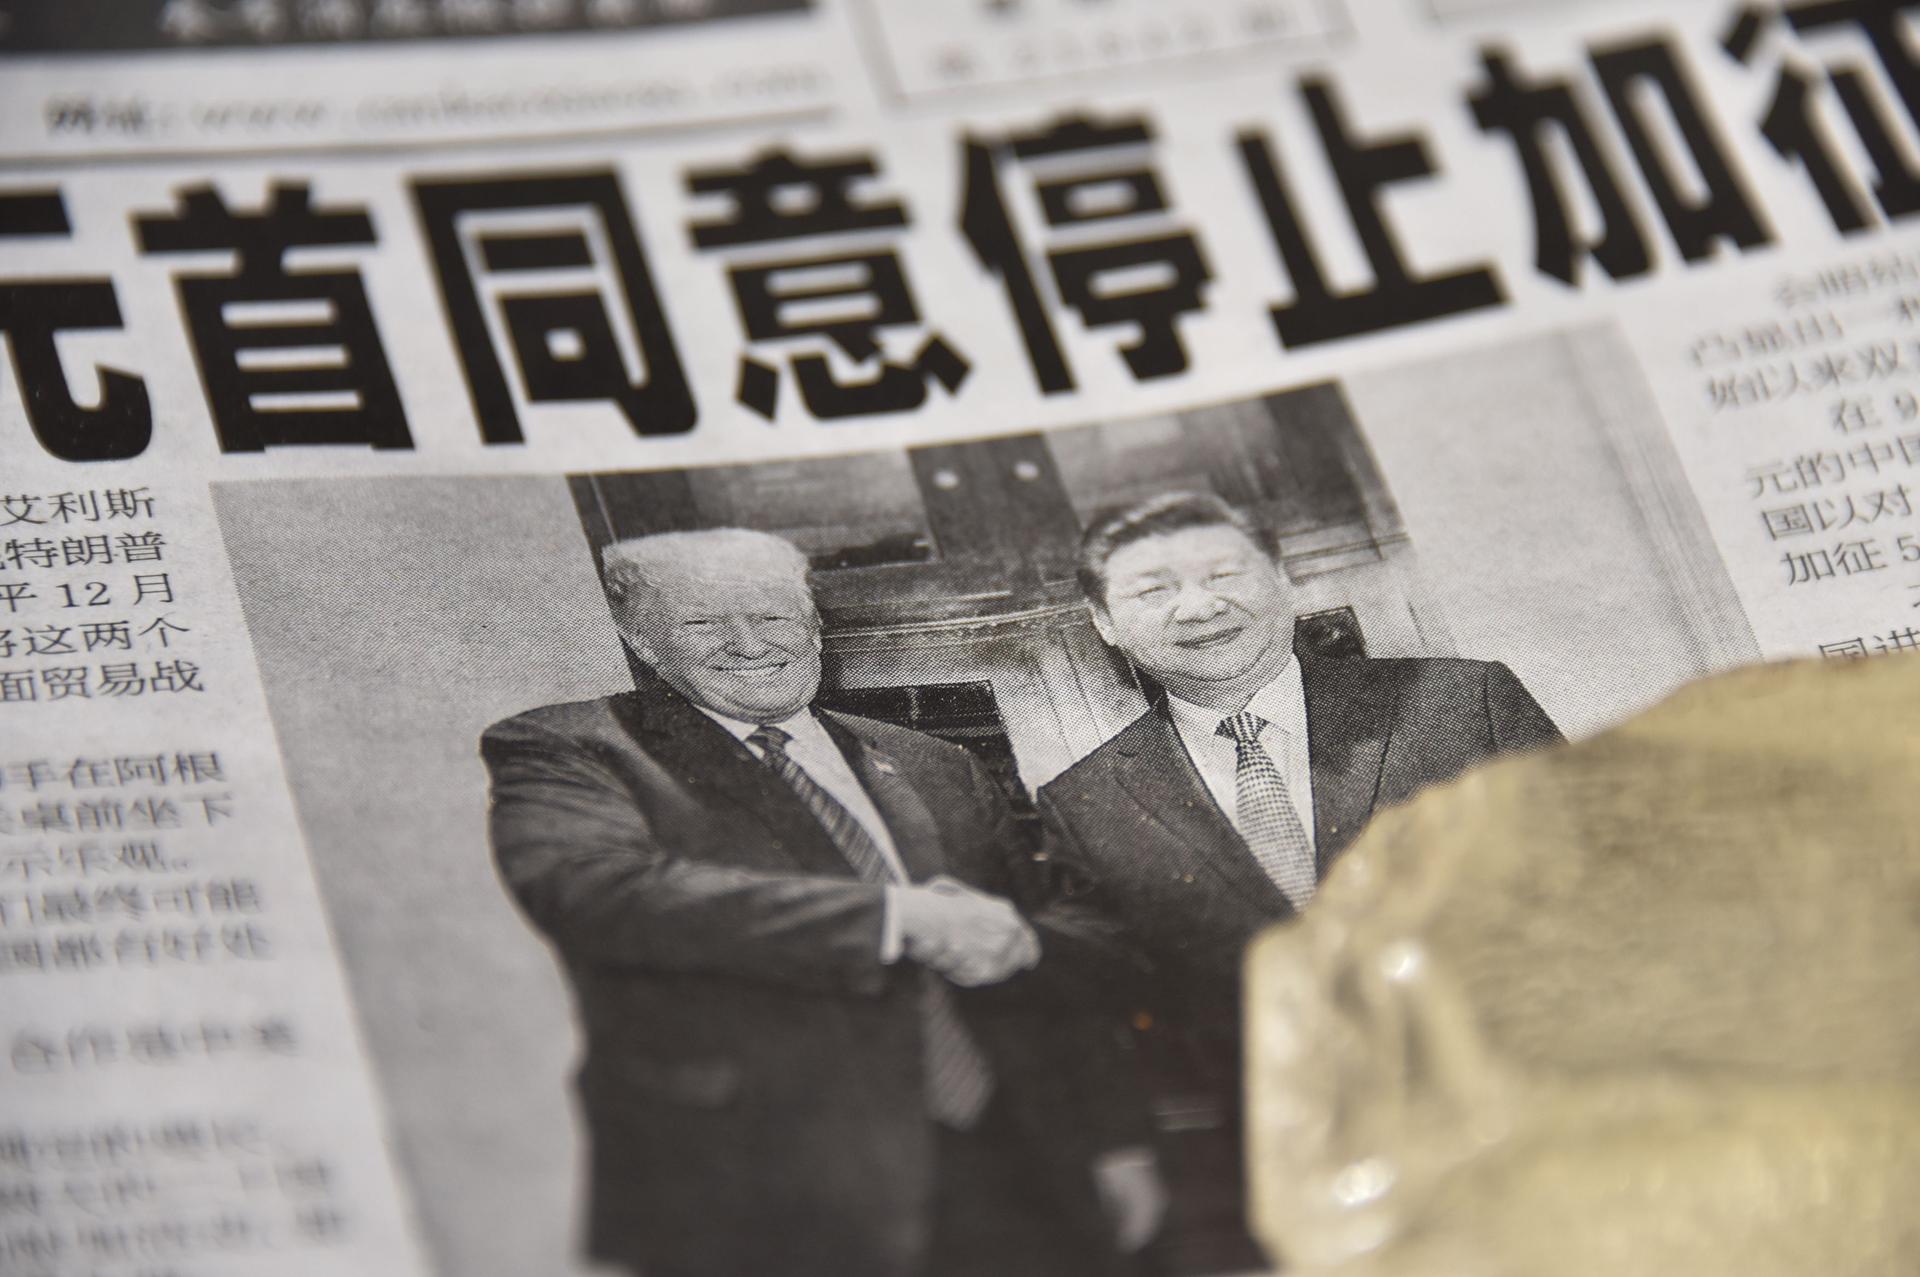 A Chinese newspaper displays an image of friendly presidents Donald Trump and Xi Jinping.